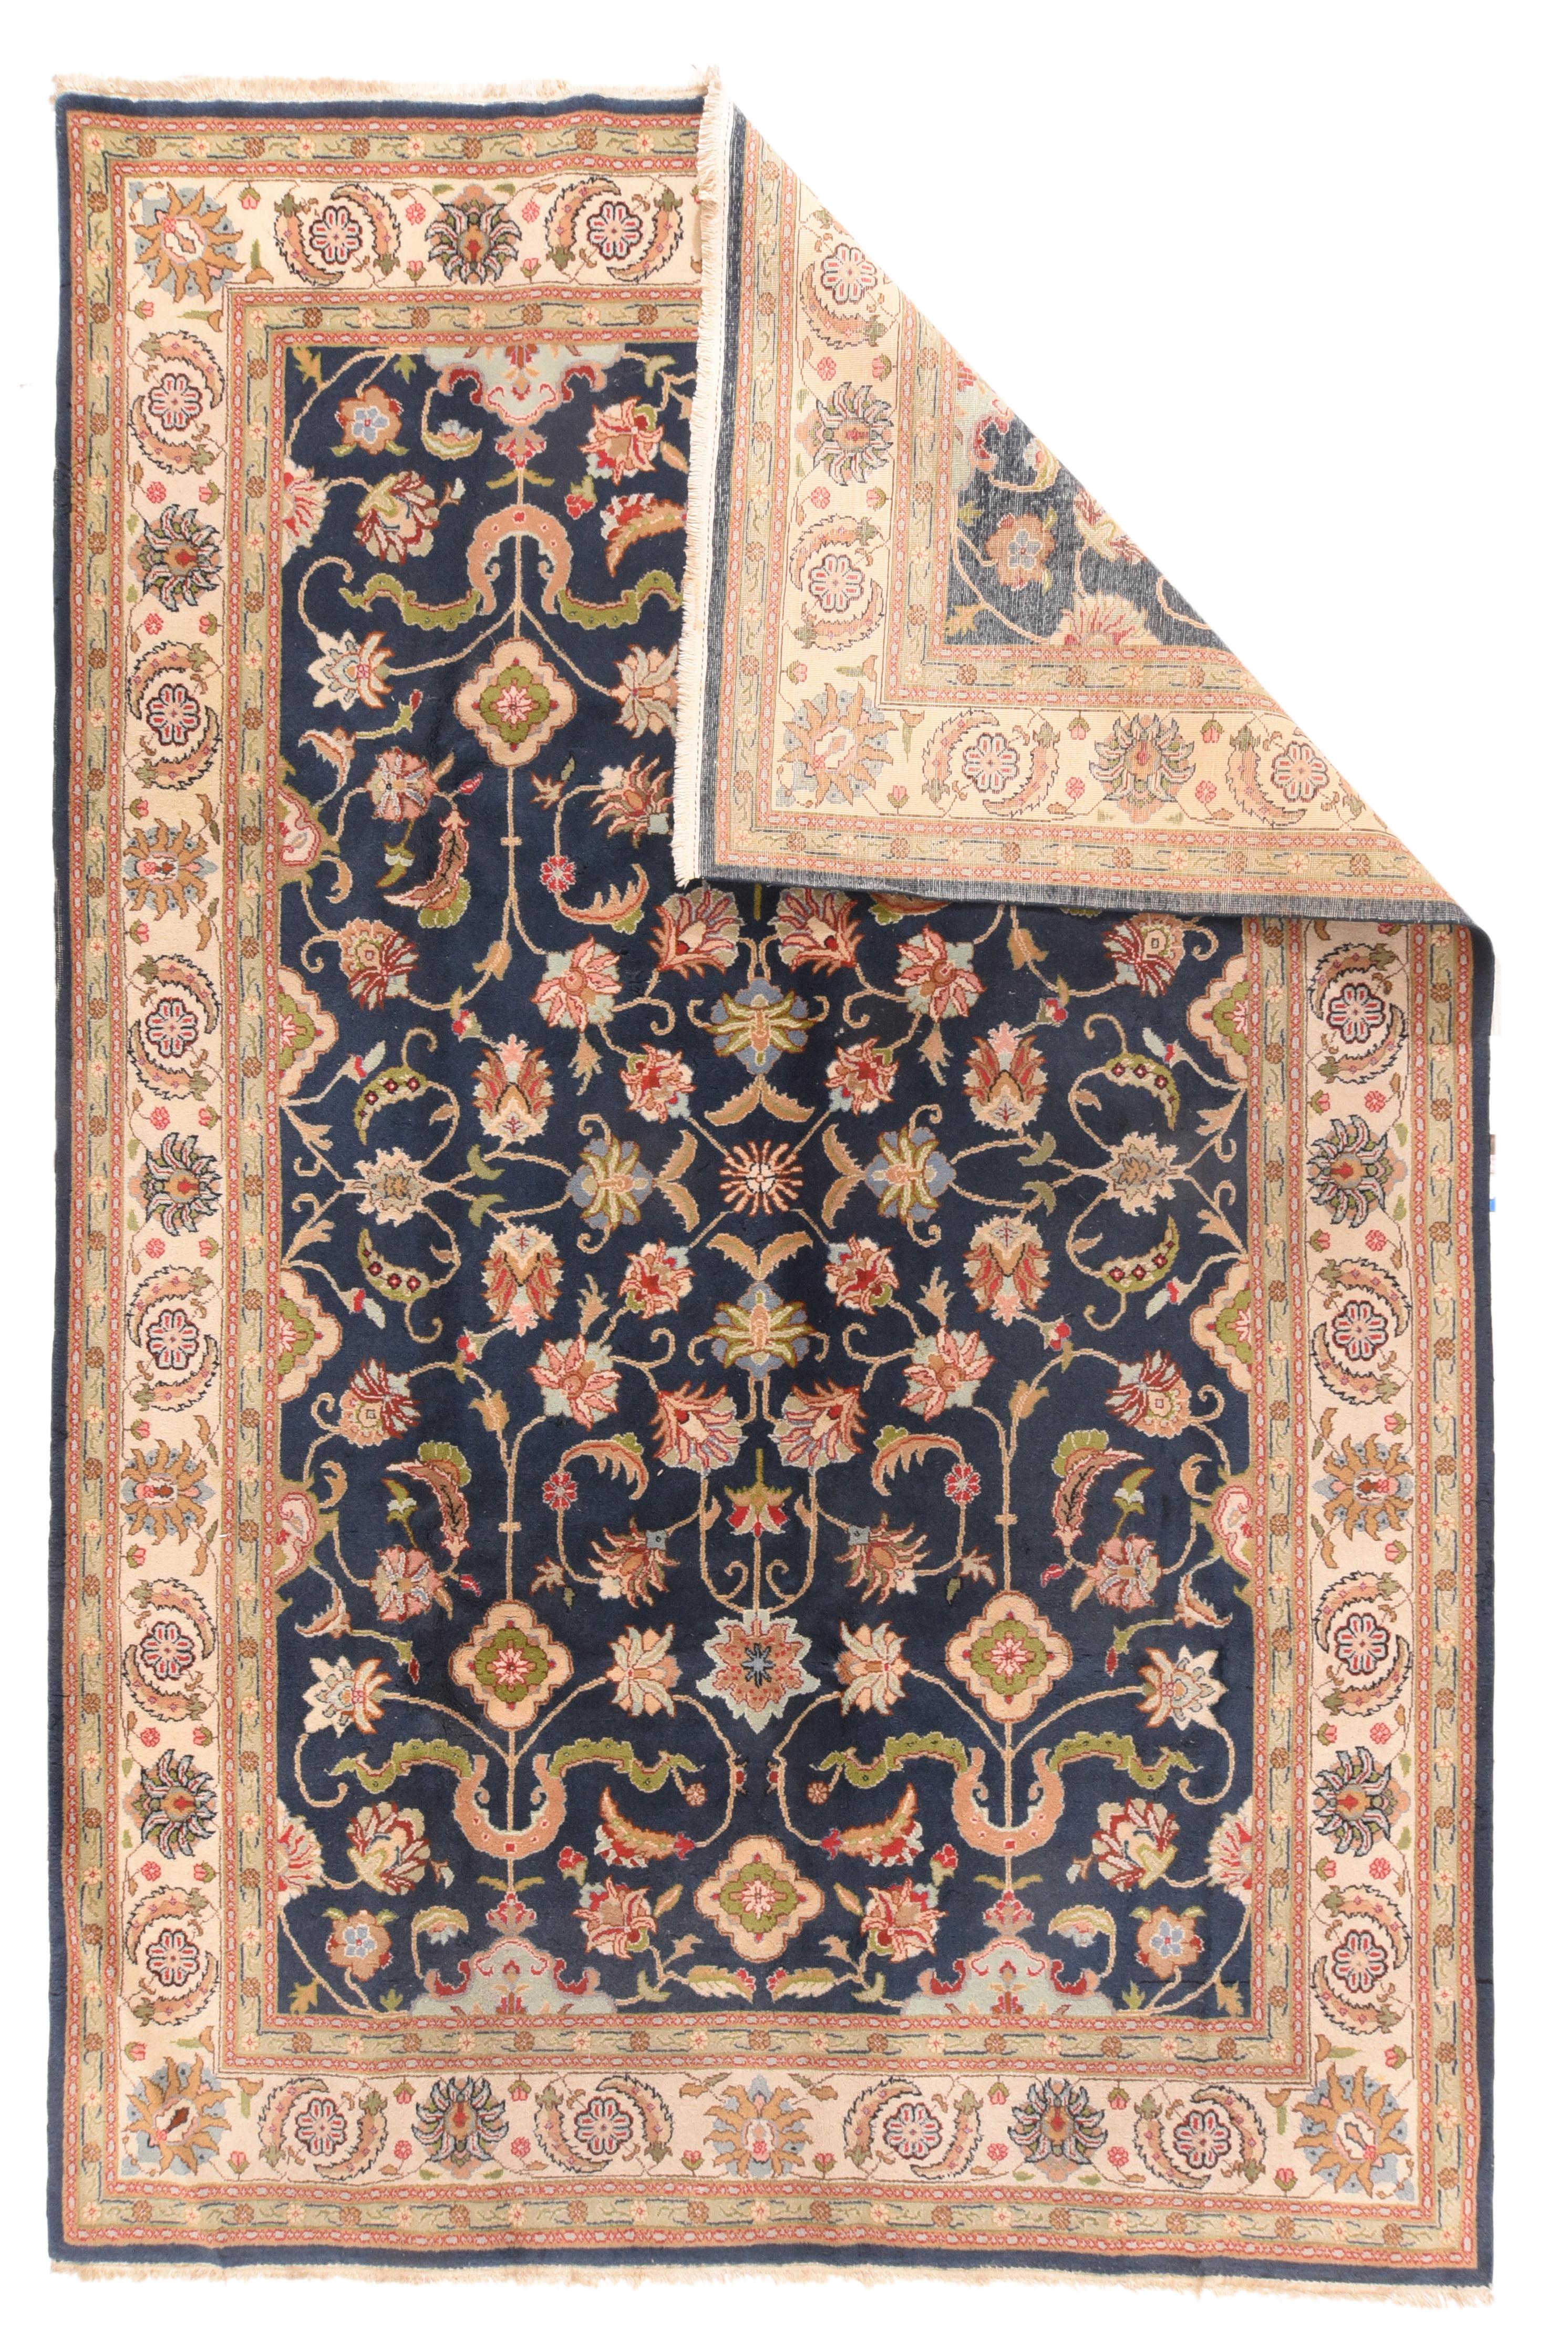 Vintage Romanian rug 7'8'' x 10'7''. The navy field shows four lively cloud bands accenting a palmette, sickle leaf and stem allover pattern centred around an open diamonds and radiating rosette. Cream sand border with sickle leaf, rosette and petal